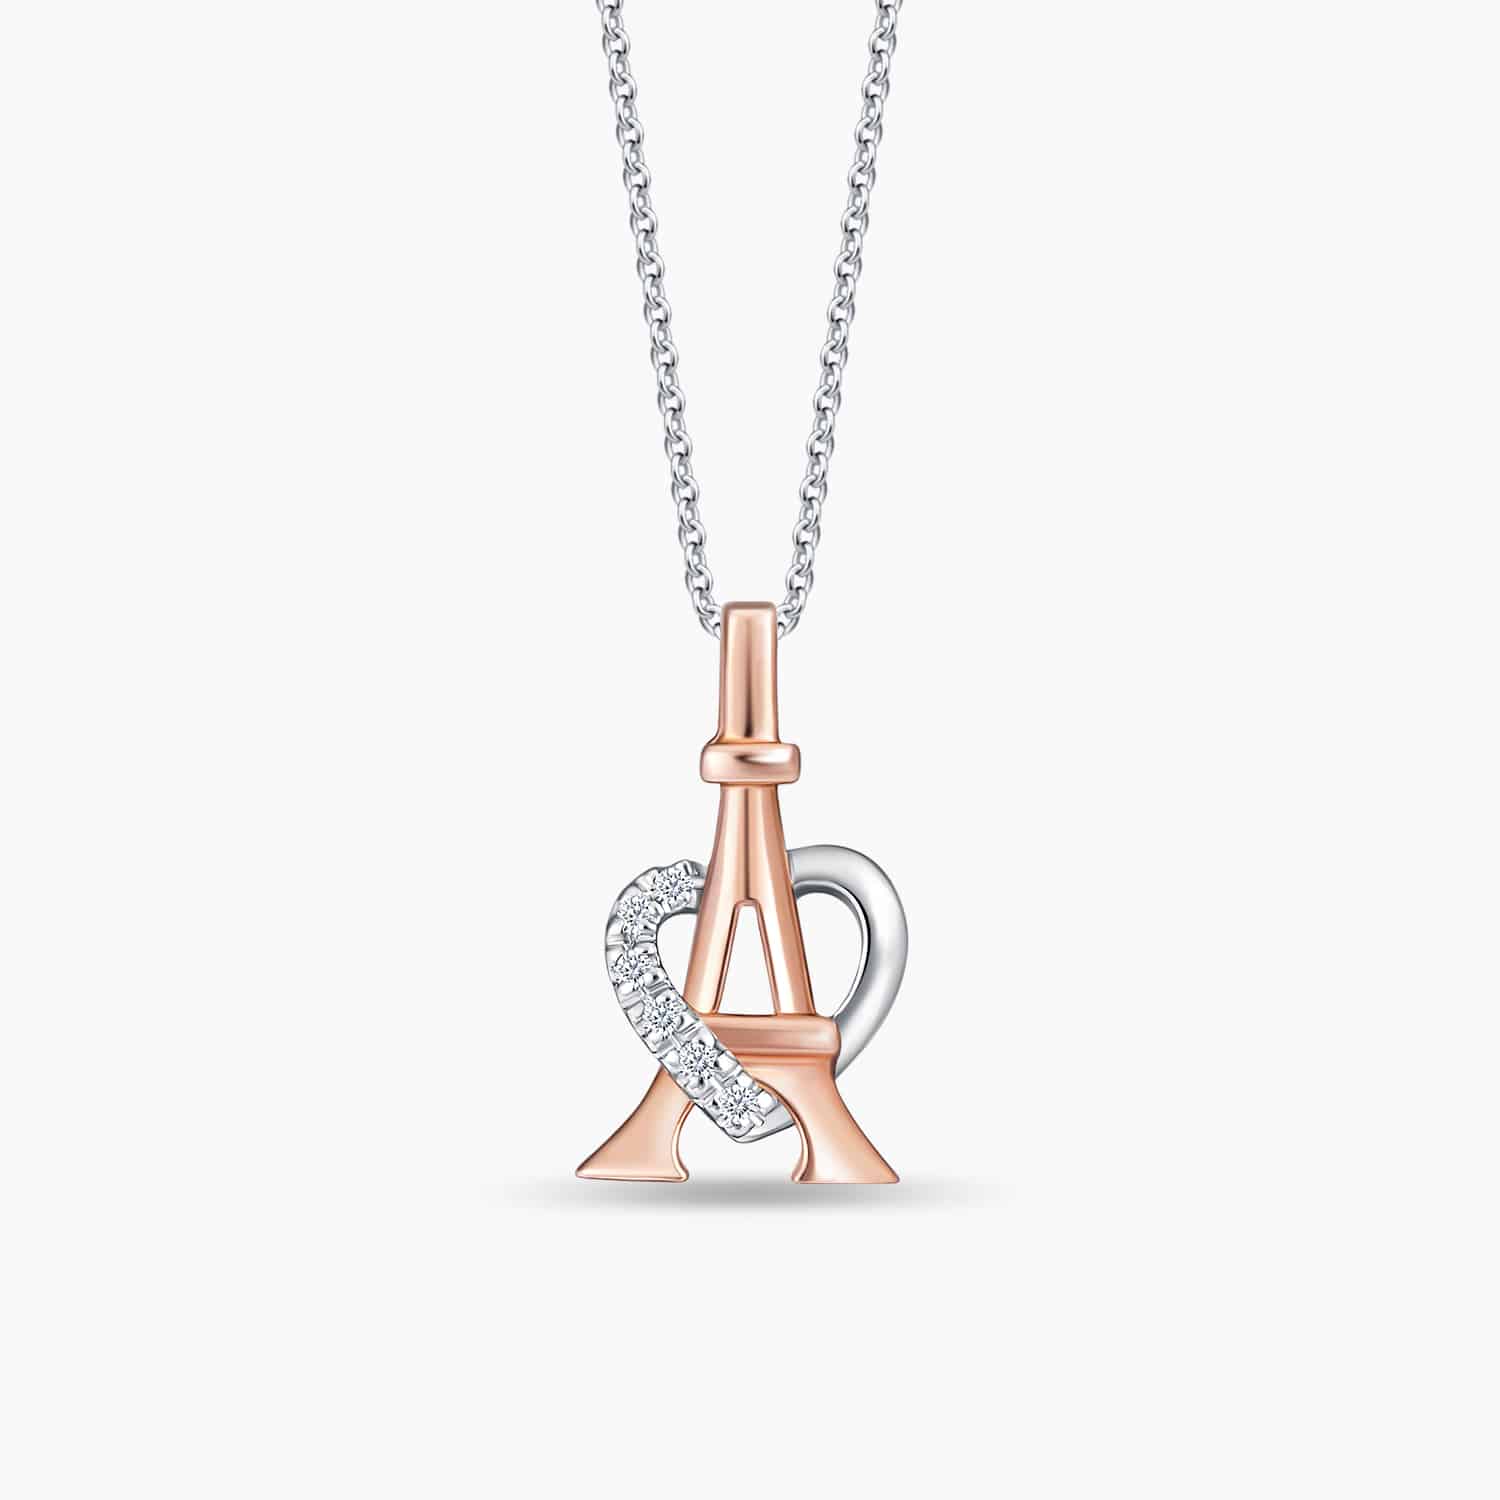 LVC Charmes Paris in My Heart Eiffel Diamond Pendant made with 14K White Gold & Rose Gold